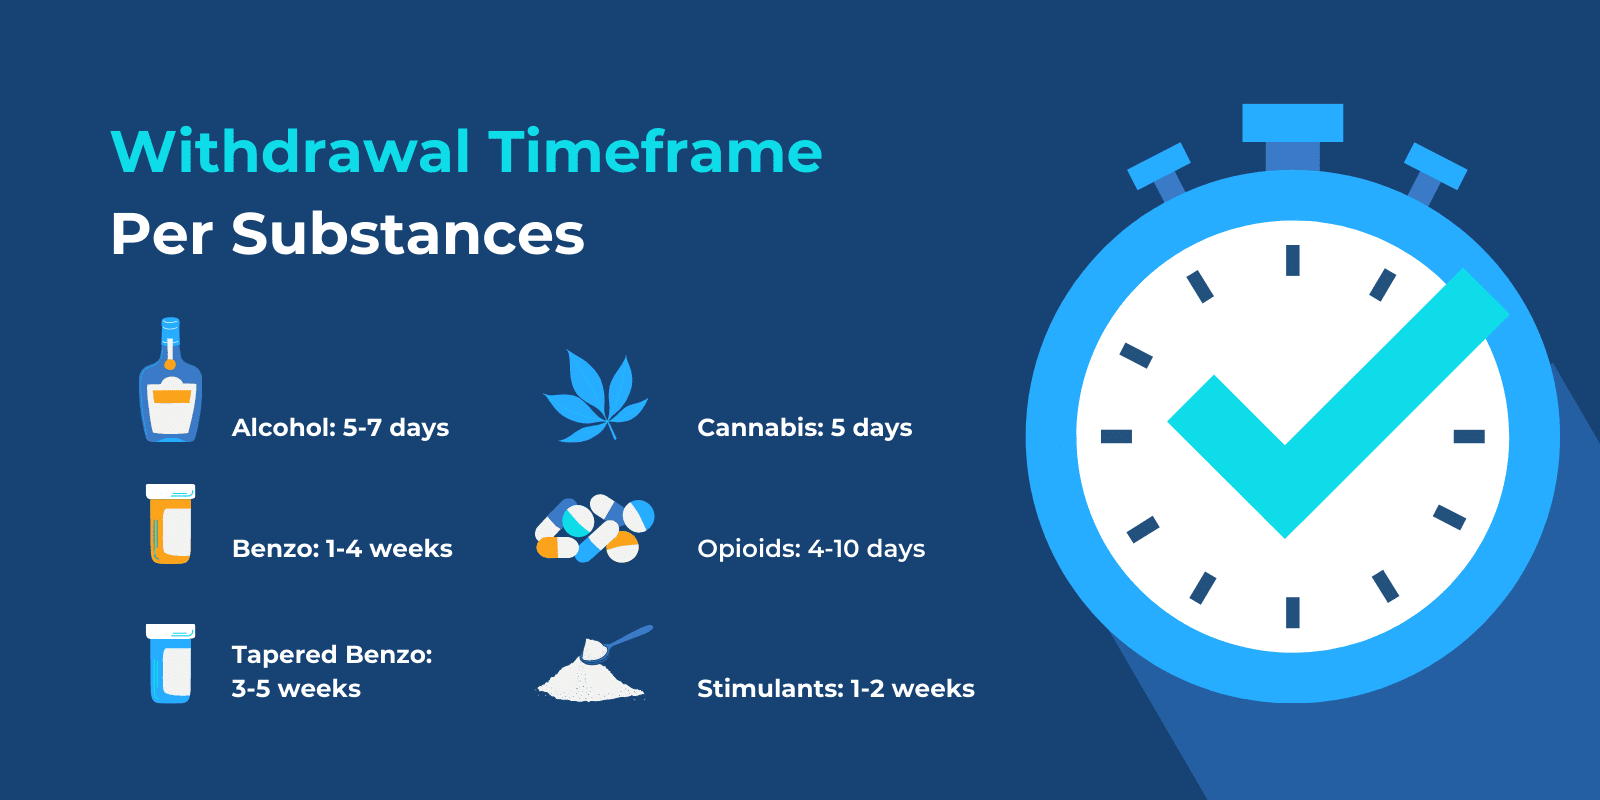 Withdrawal timeframe per substance with graphics of each substance like alcohol, benzo, cannabis, opioids, and stimulants.